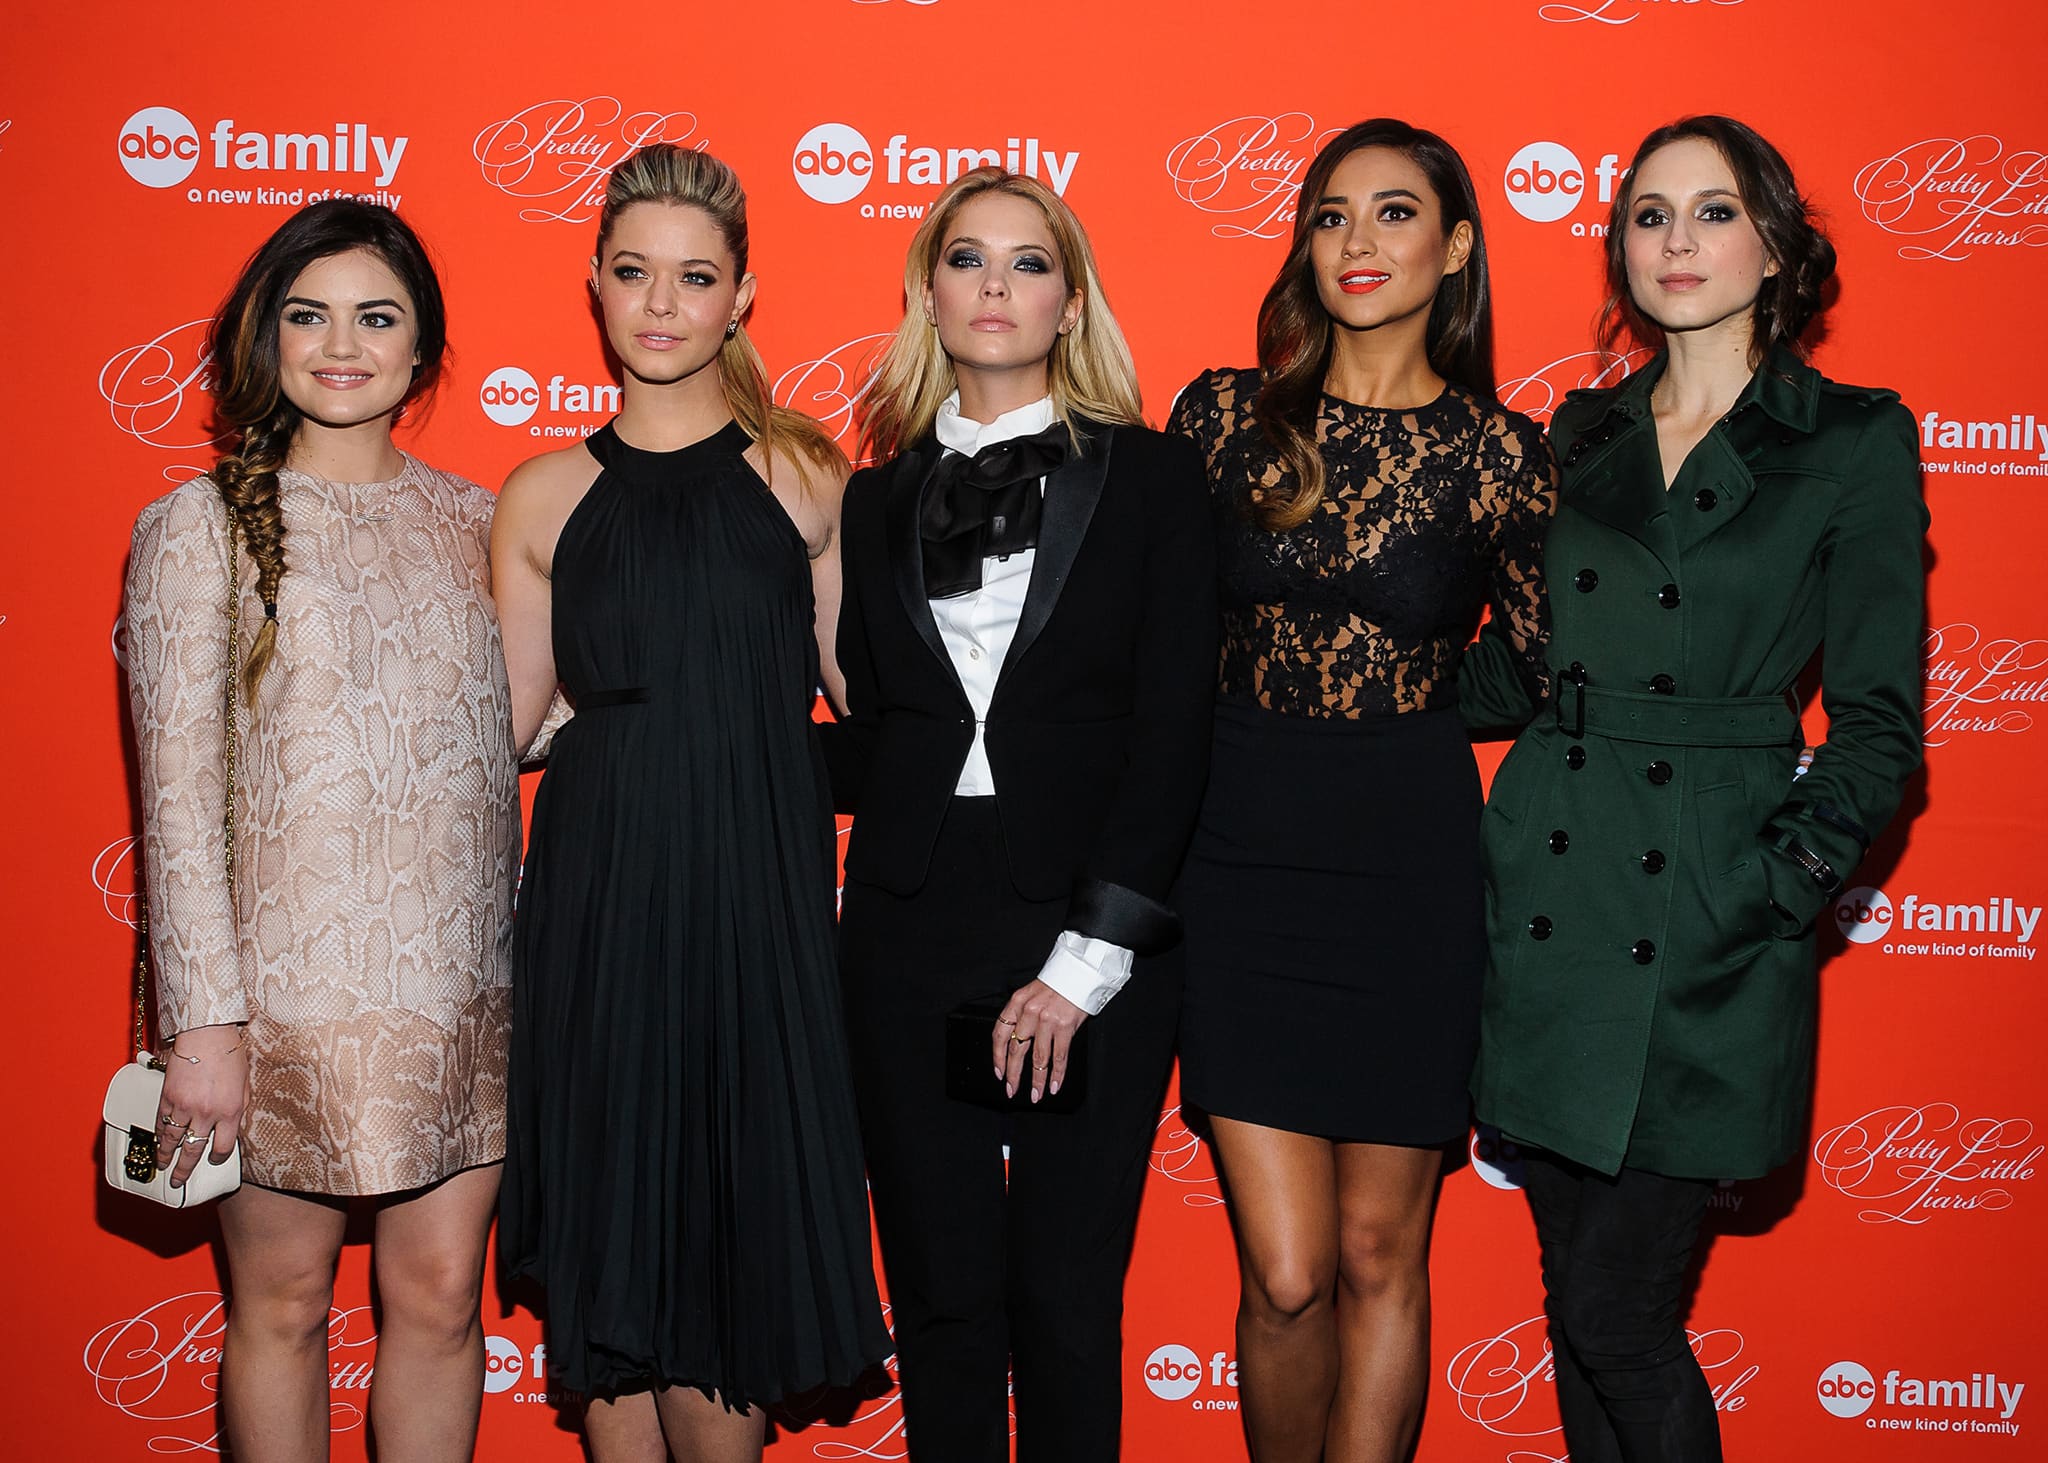 Lucy Hale, Sasha Pieterse, Ashley Benson, Shay Mitchell, and Troian Bellisario at the Pretty Little Liars season finale screening on March 18, 2014